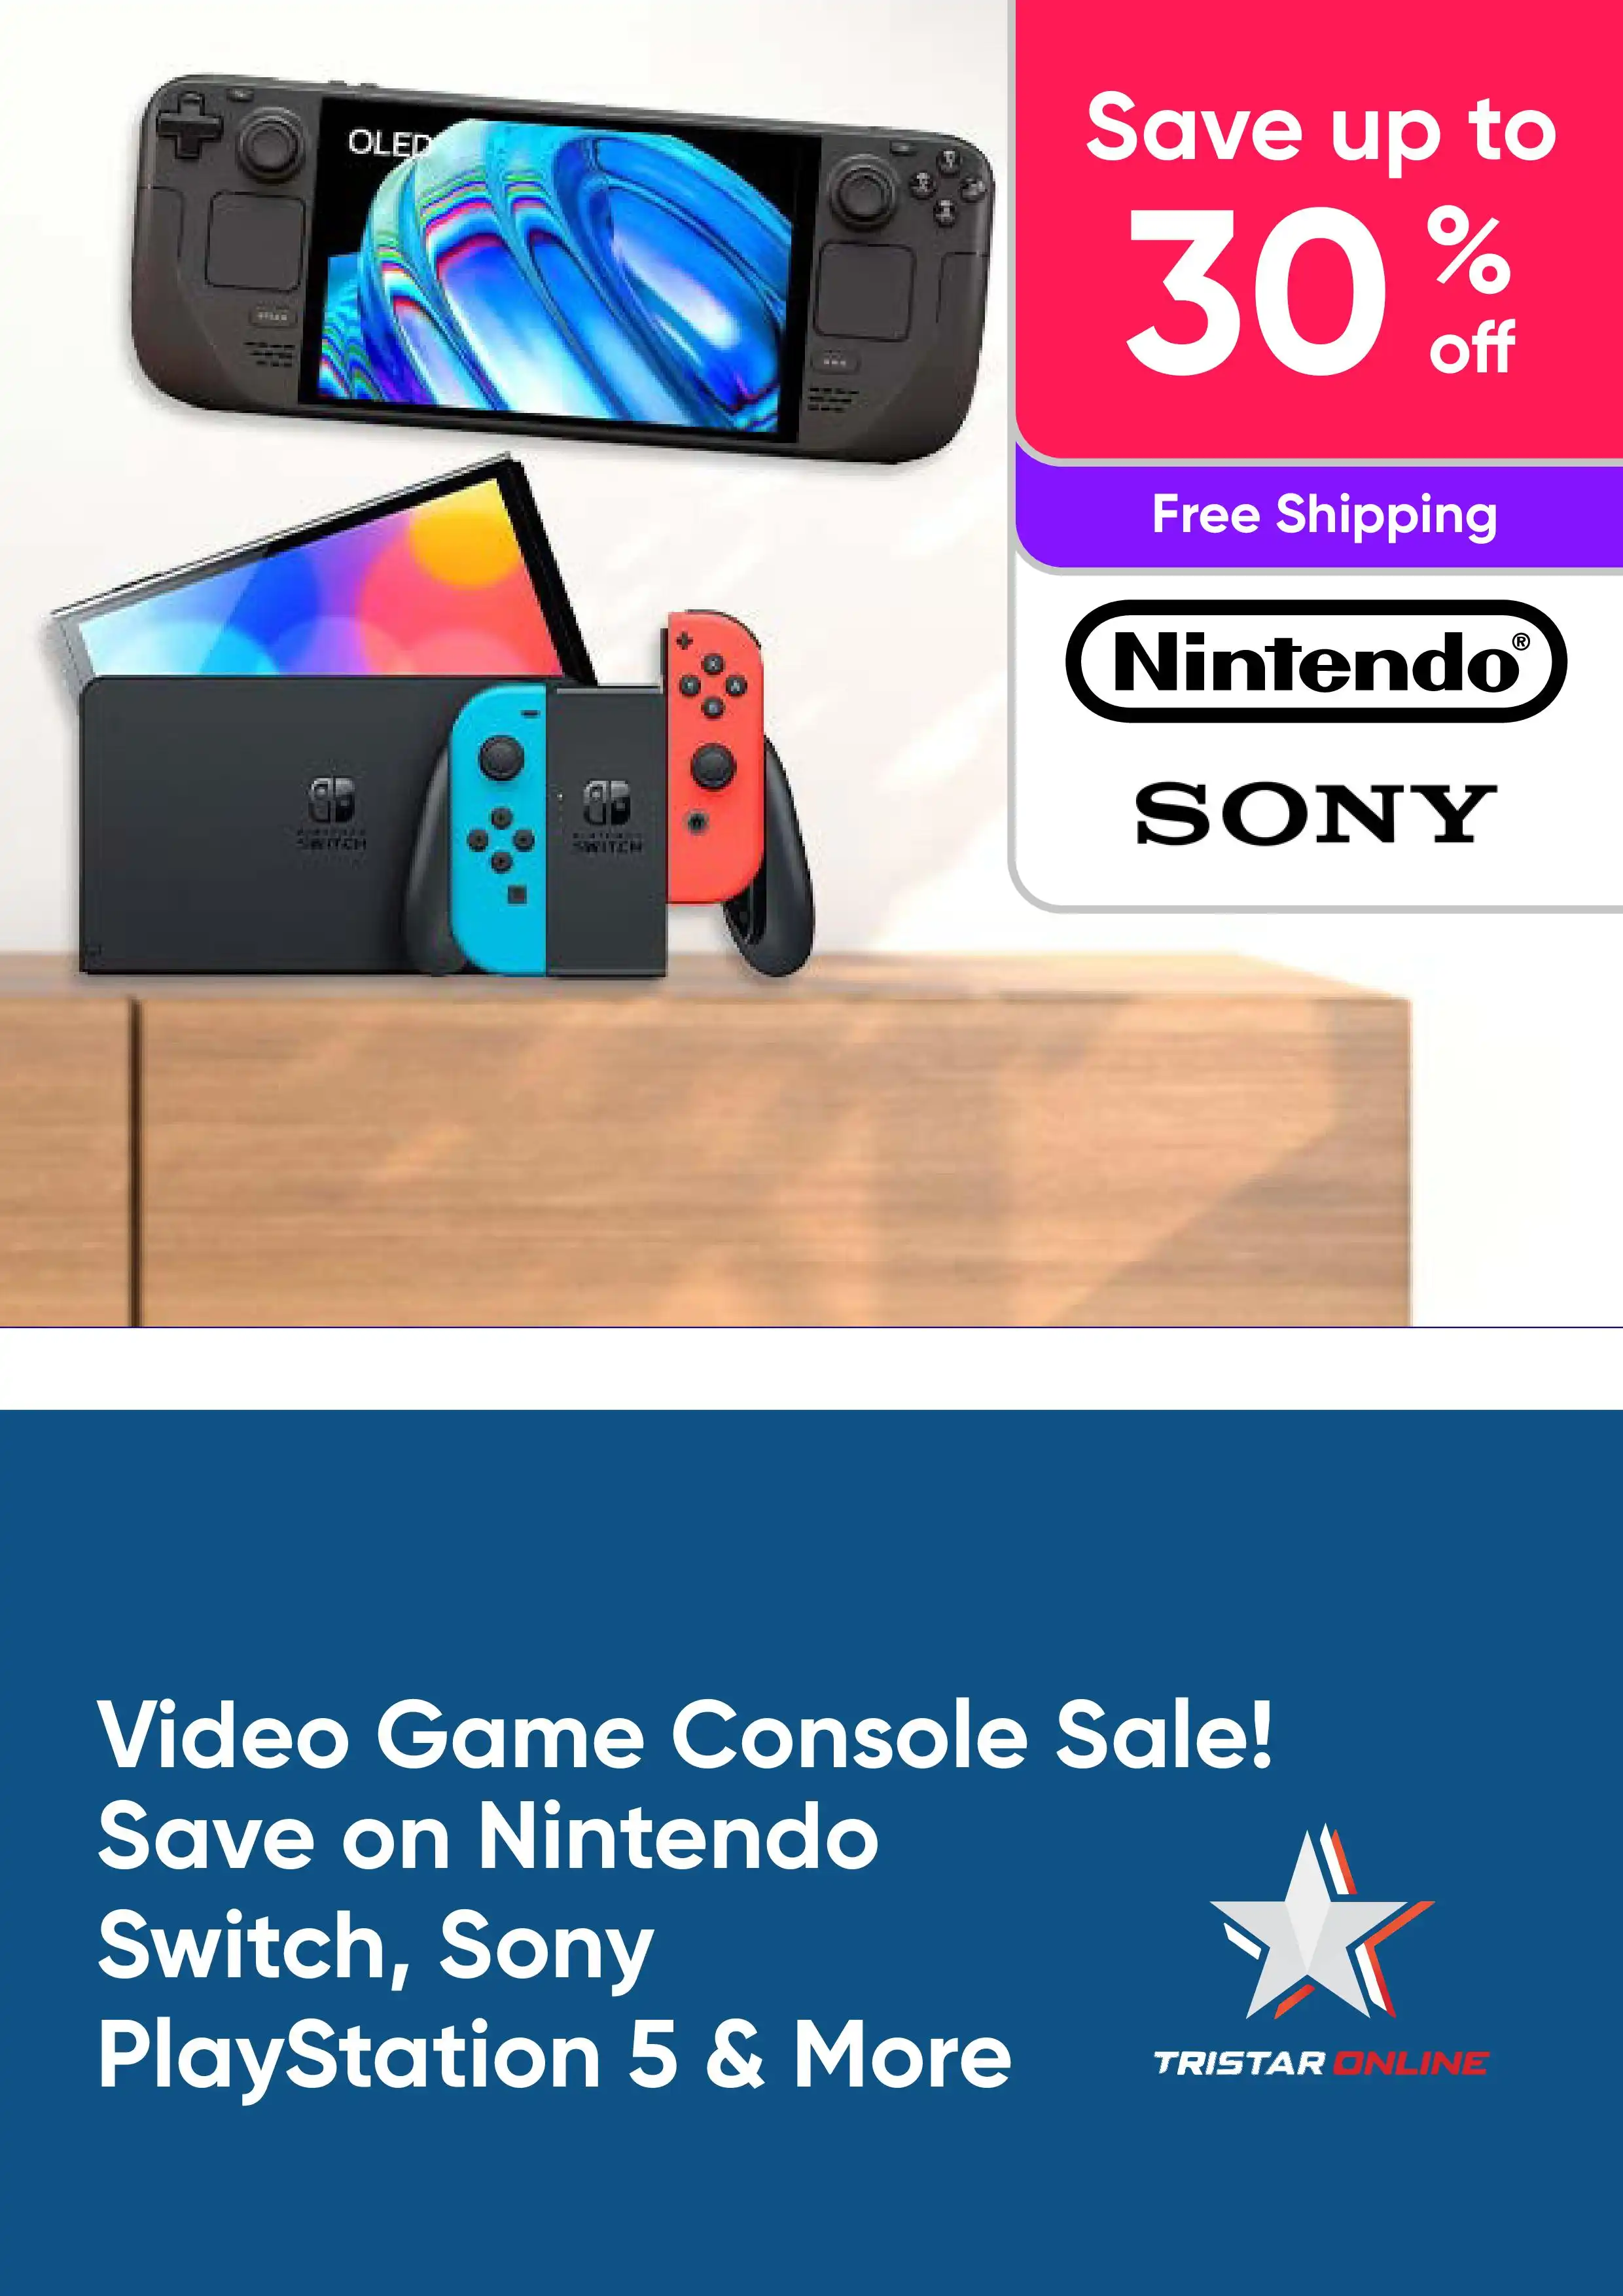 Video Game Console Sale! Save on Nintendo Switch, Sony Playstation 5 & More